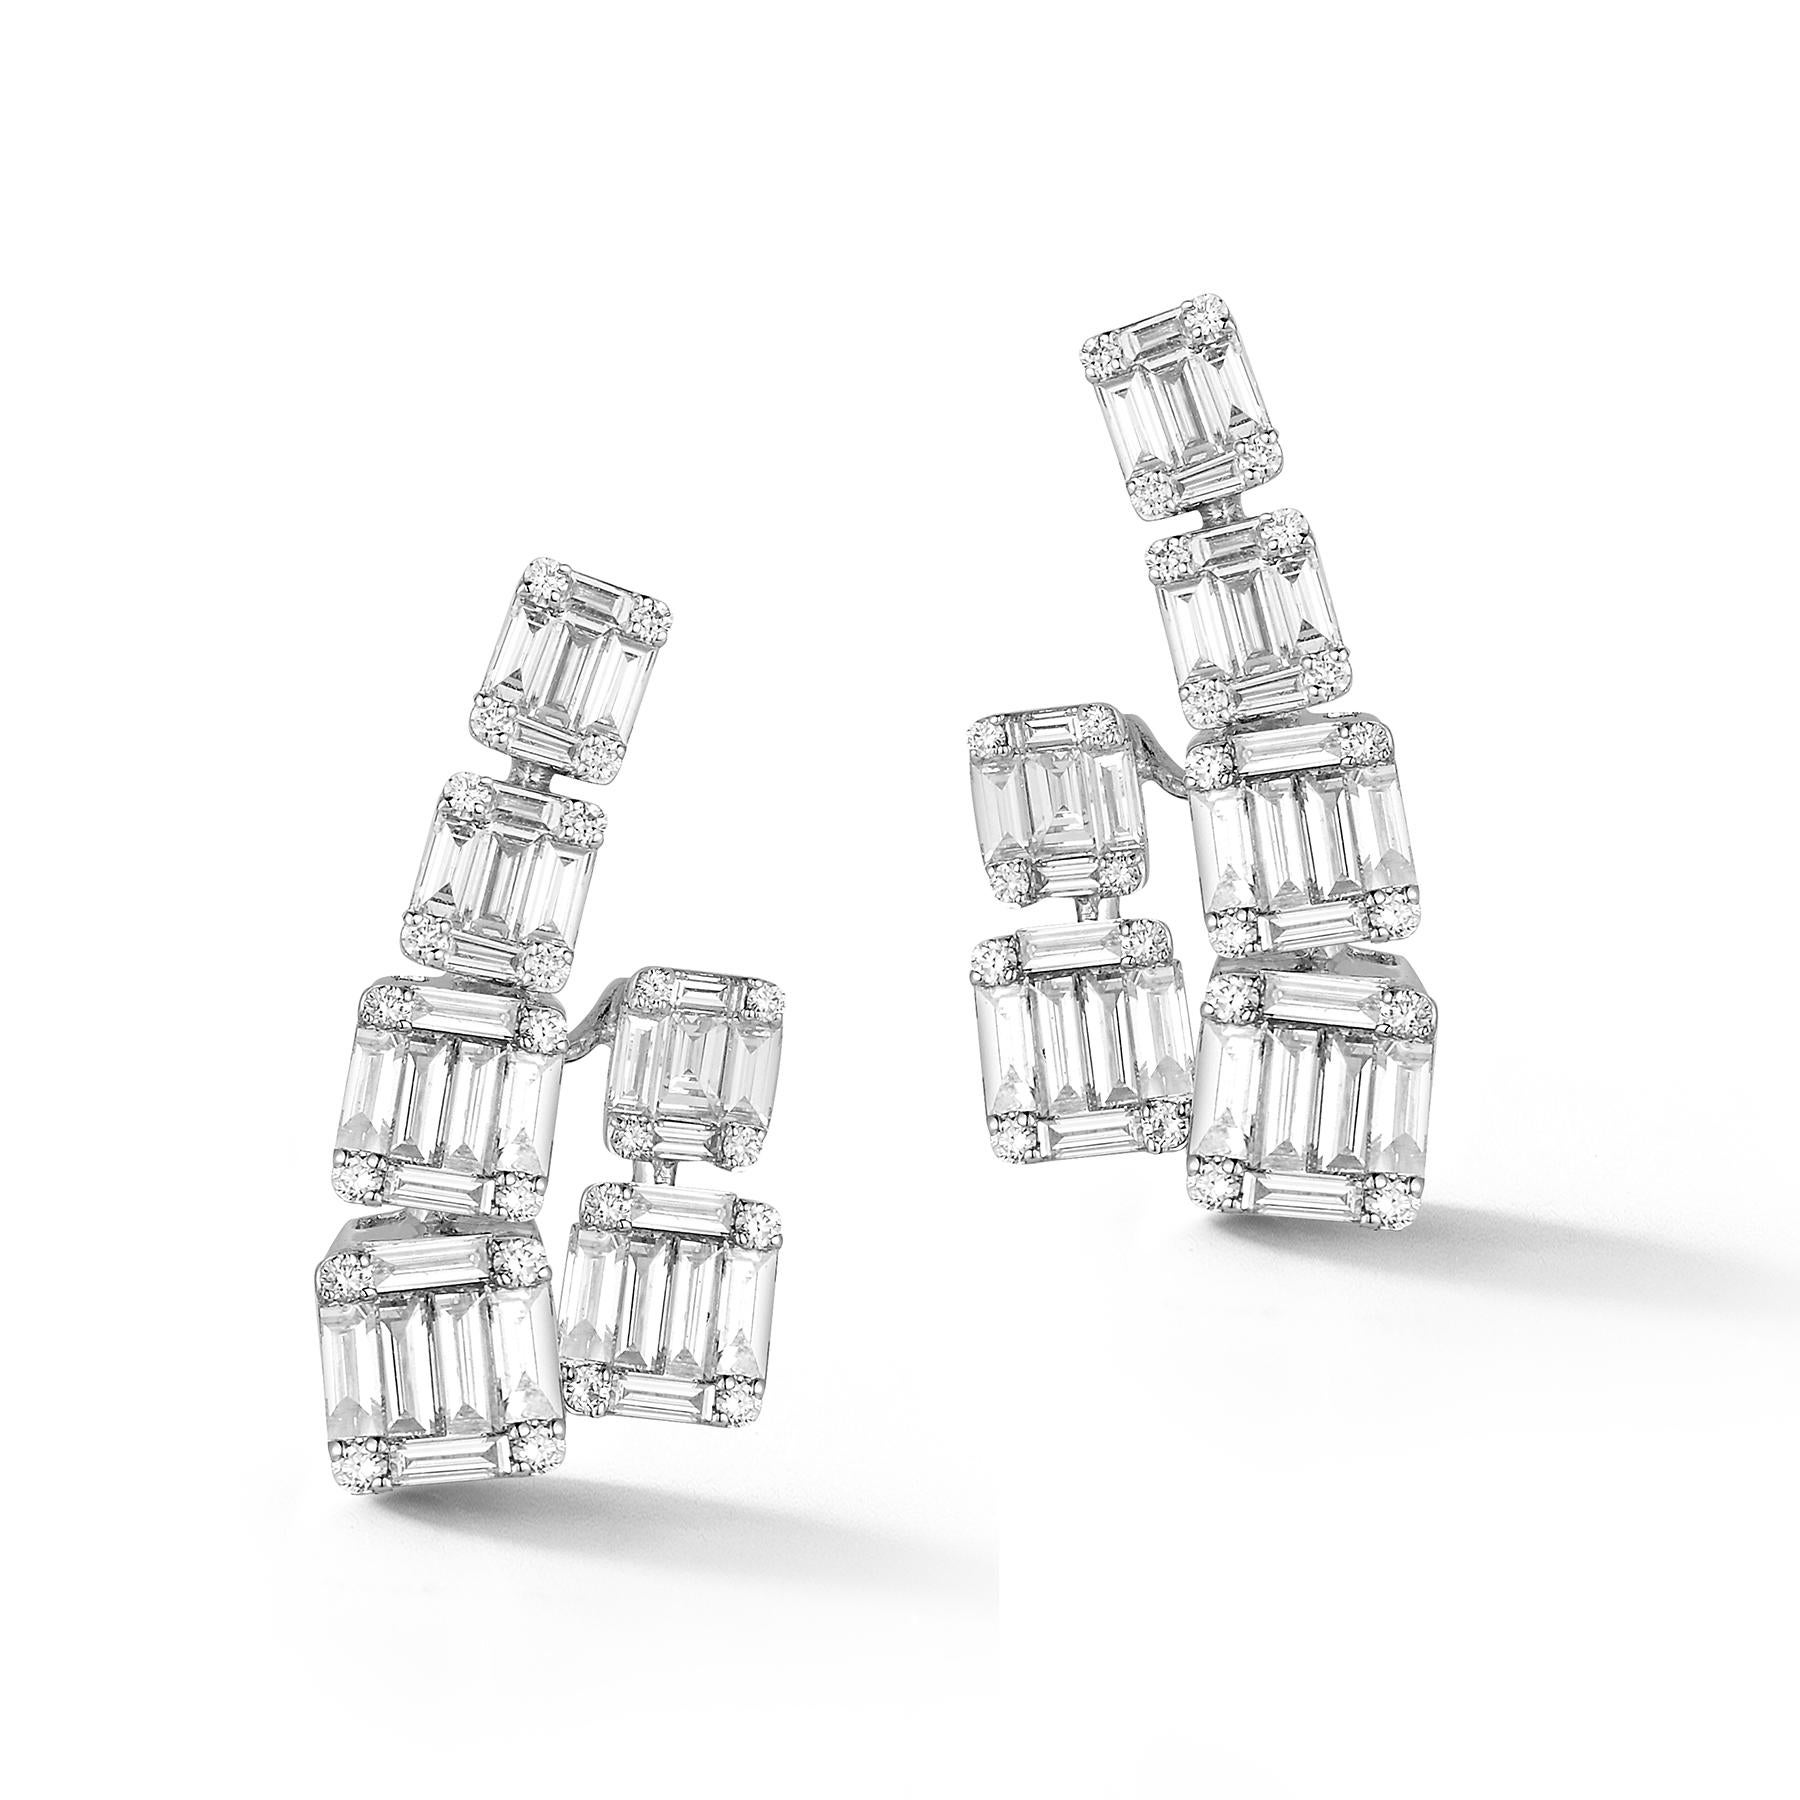 Stunning 18K White Gold Earrings in Striking, Unusual Hanging-Design with 48 Flawless White Round Diamonds and 66 Flawless White Baguette-shaped Diamonds weighing a total of 3.32 Carats.